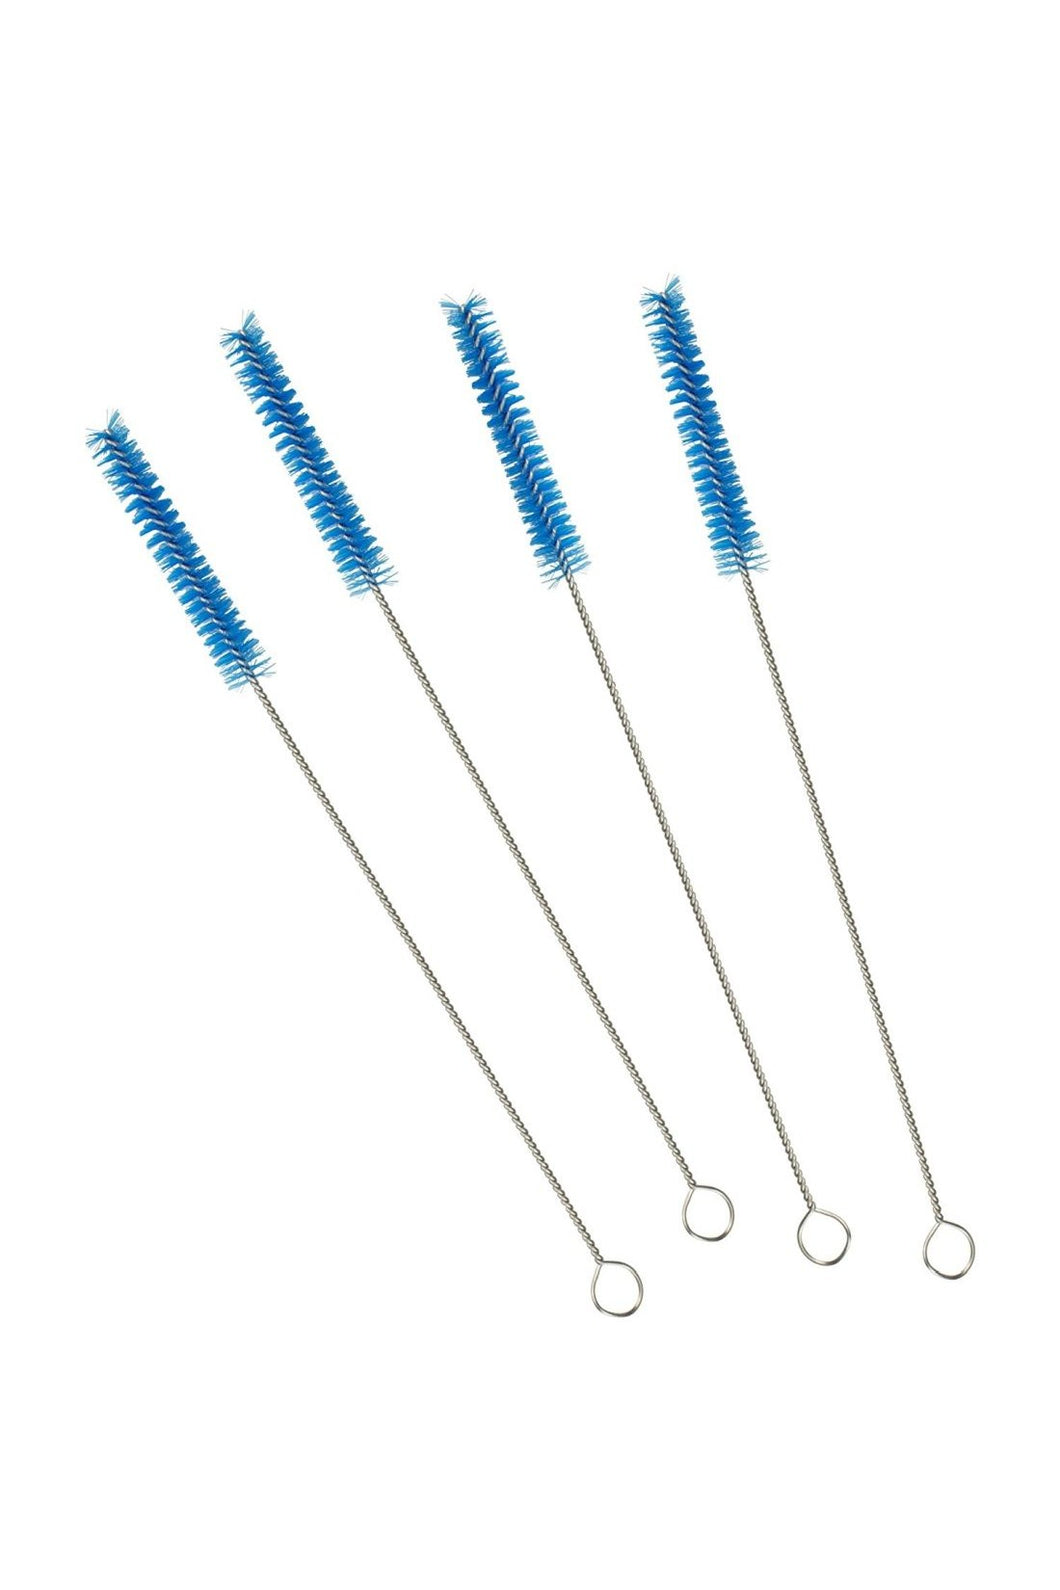 Dr Brown Cleaning Brushes 4 Pack 1